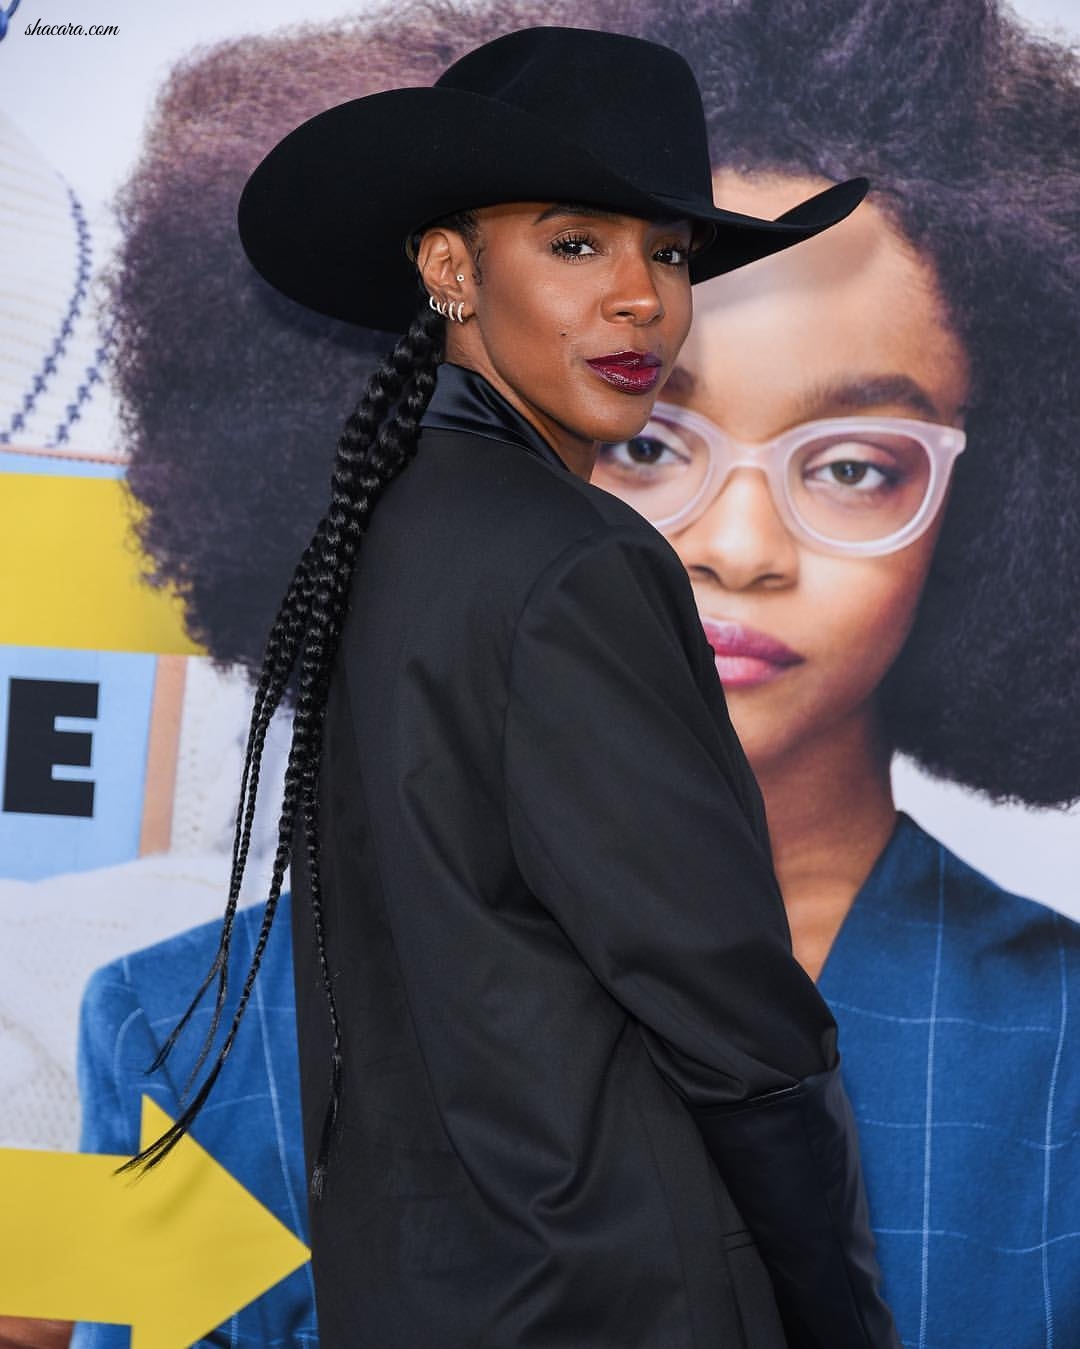 Kelly Rowland Takes Power Dressing To Another Level In This All-Black Ensemble